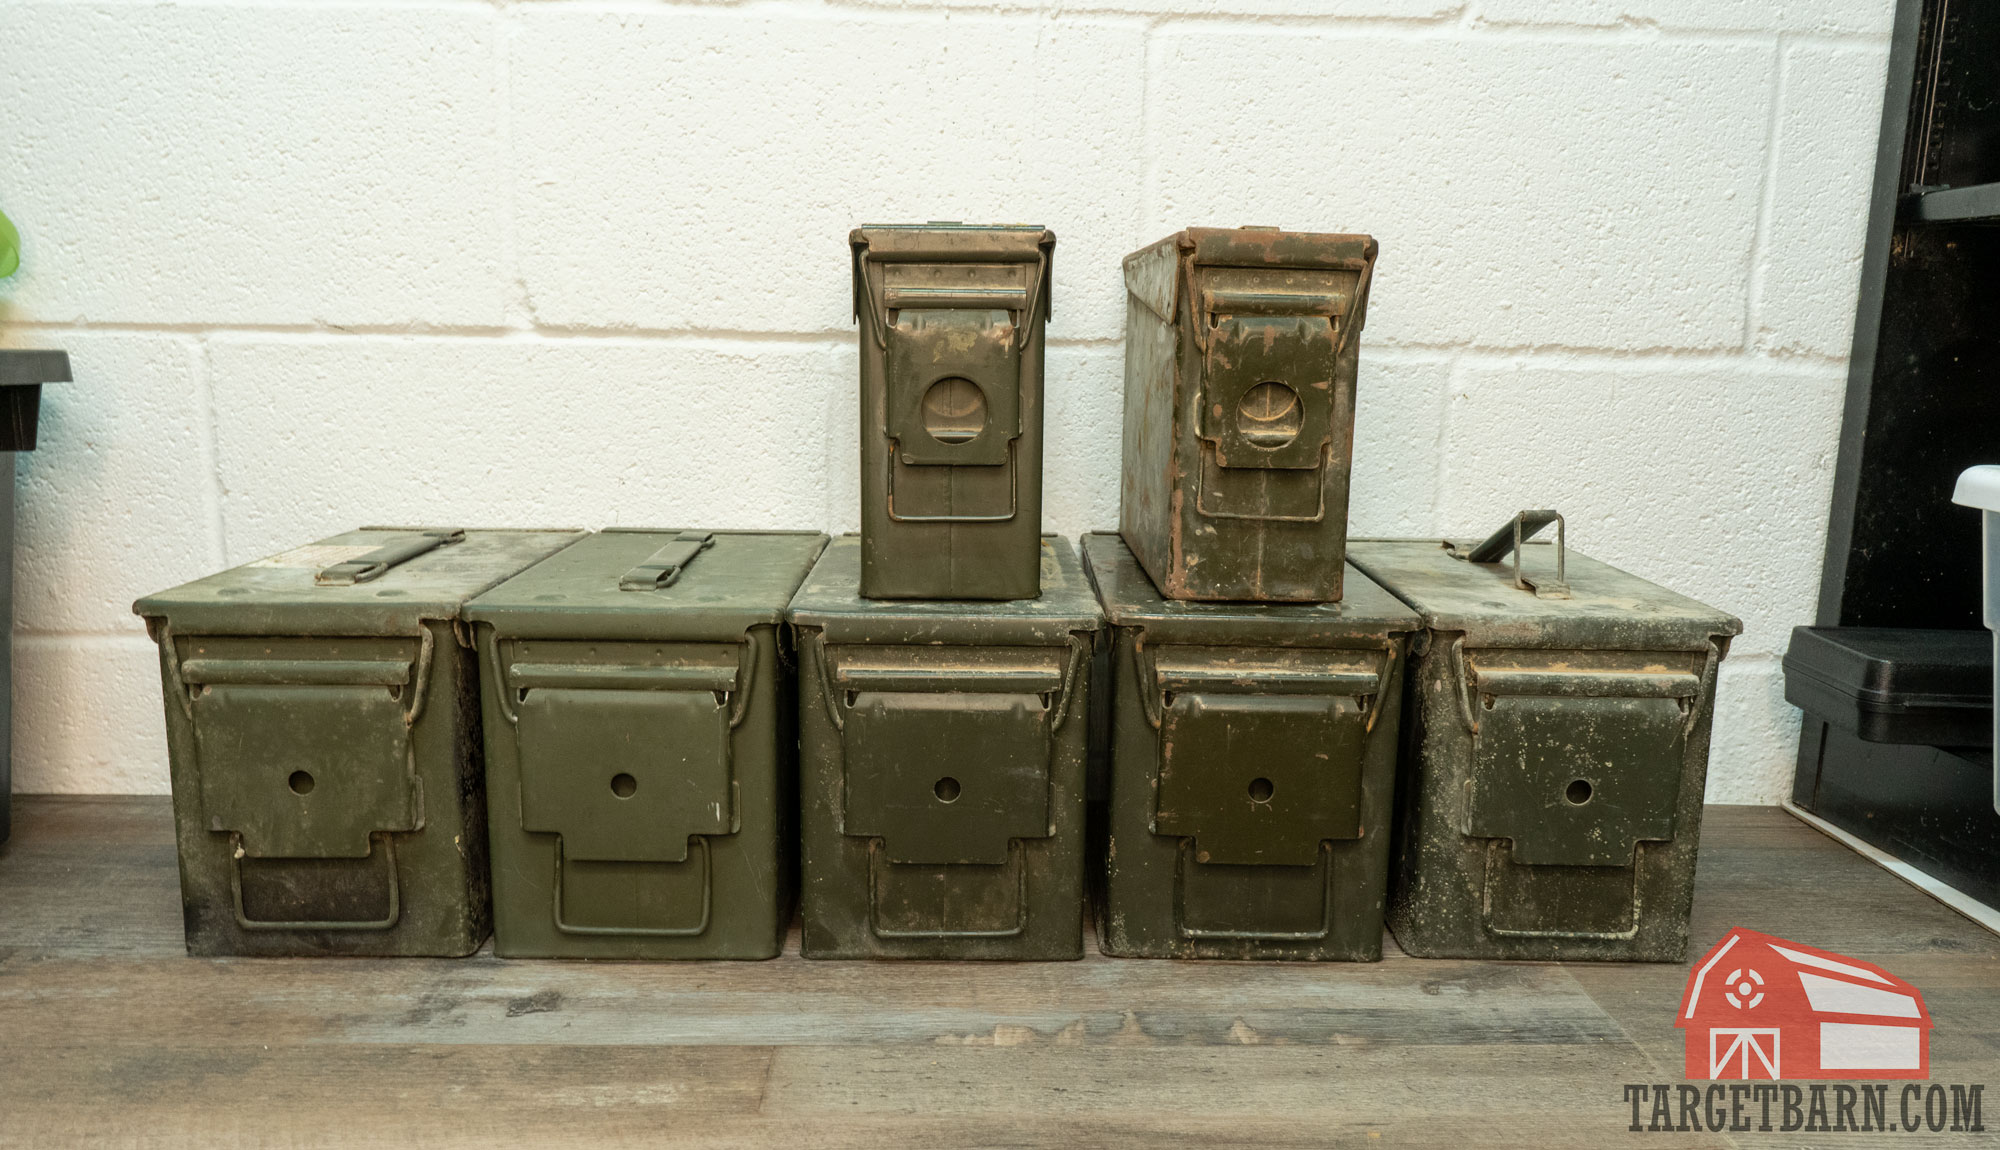 five 50 cal ammo cans and two 30 cal ammo cans stacked against a wall